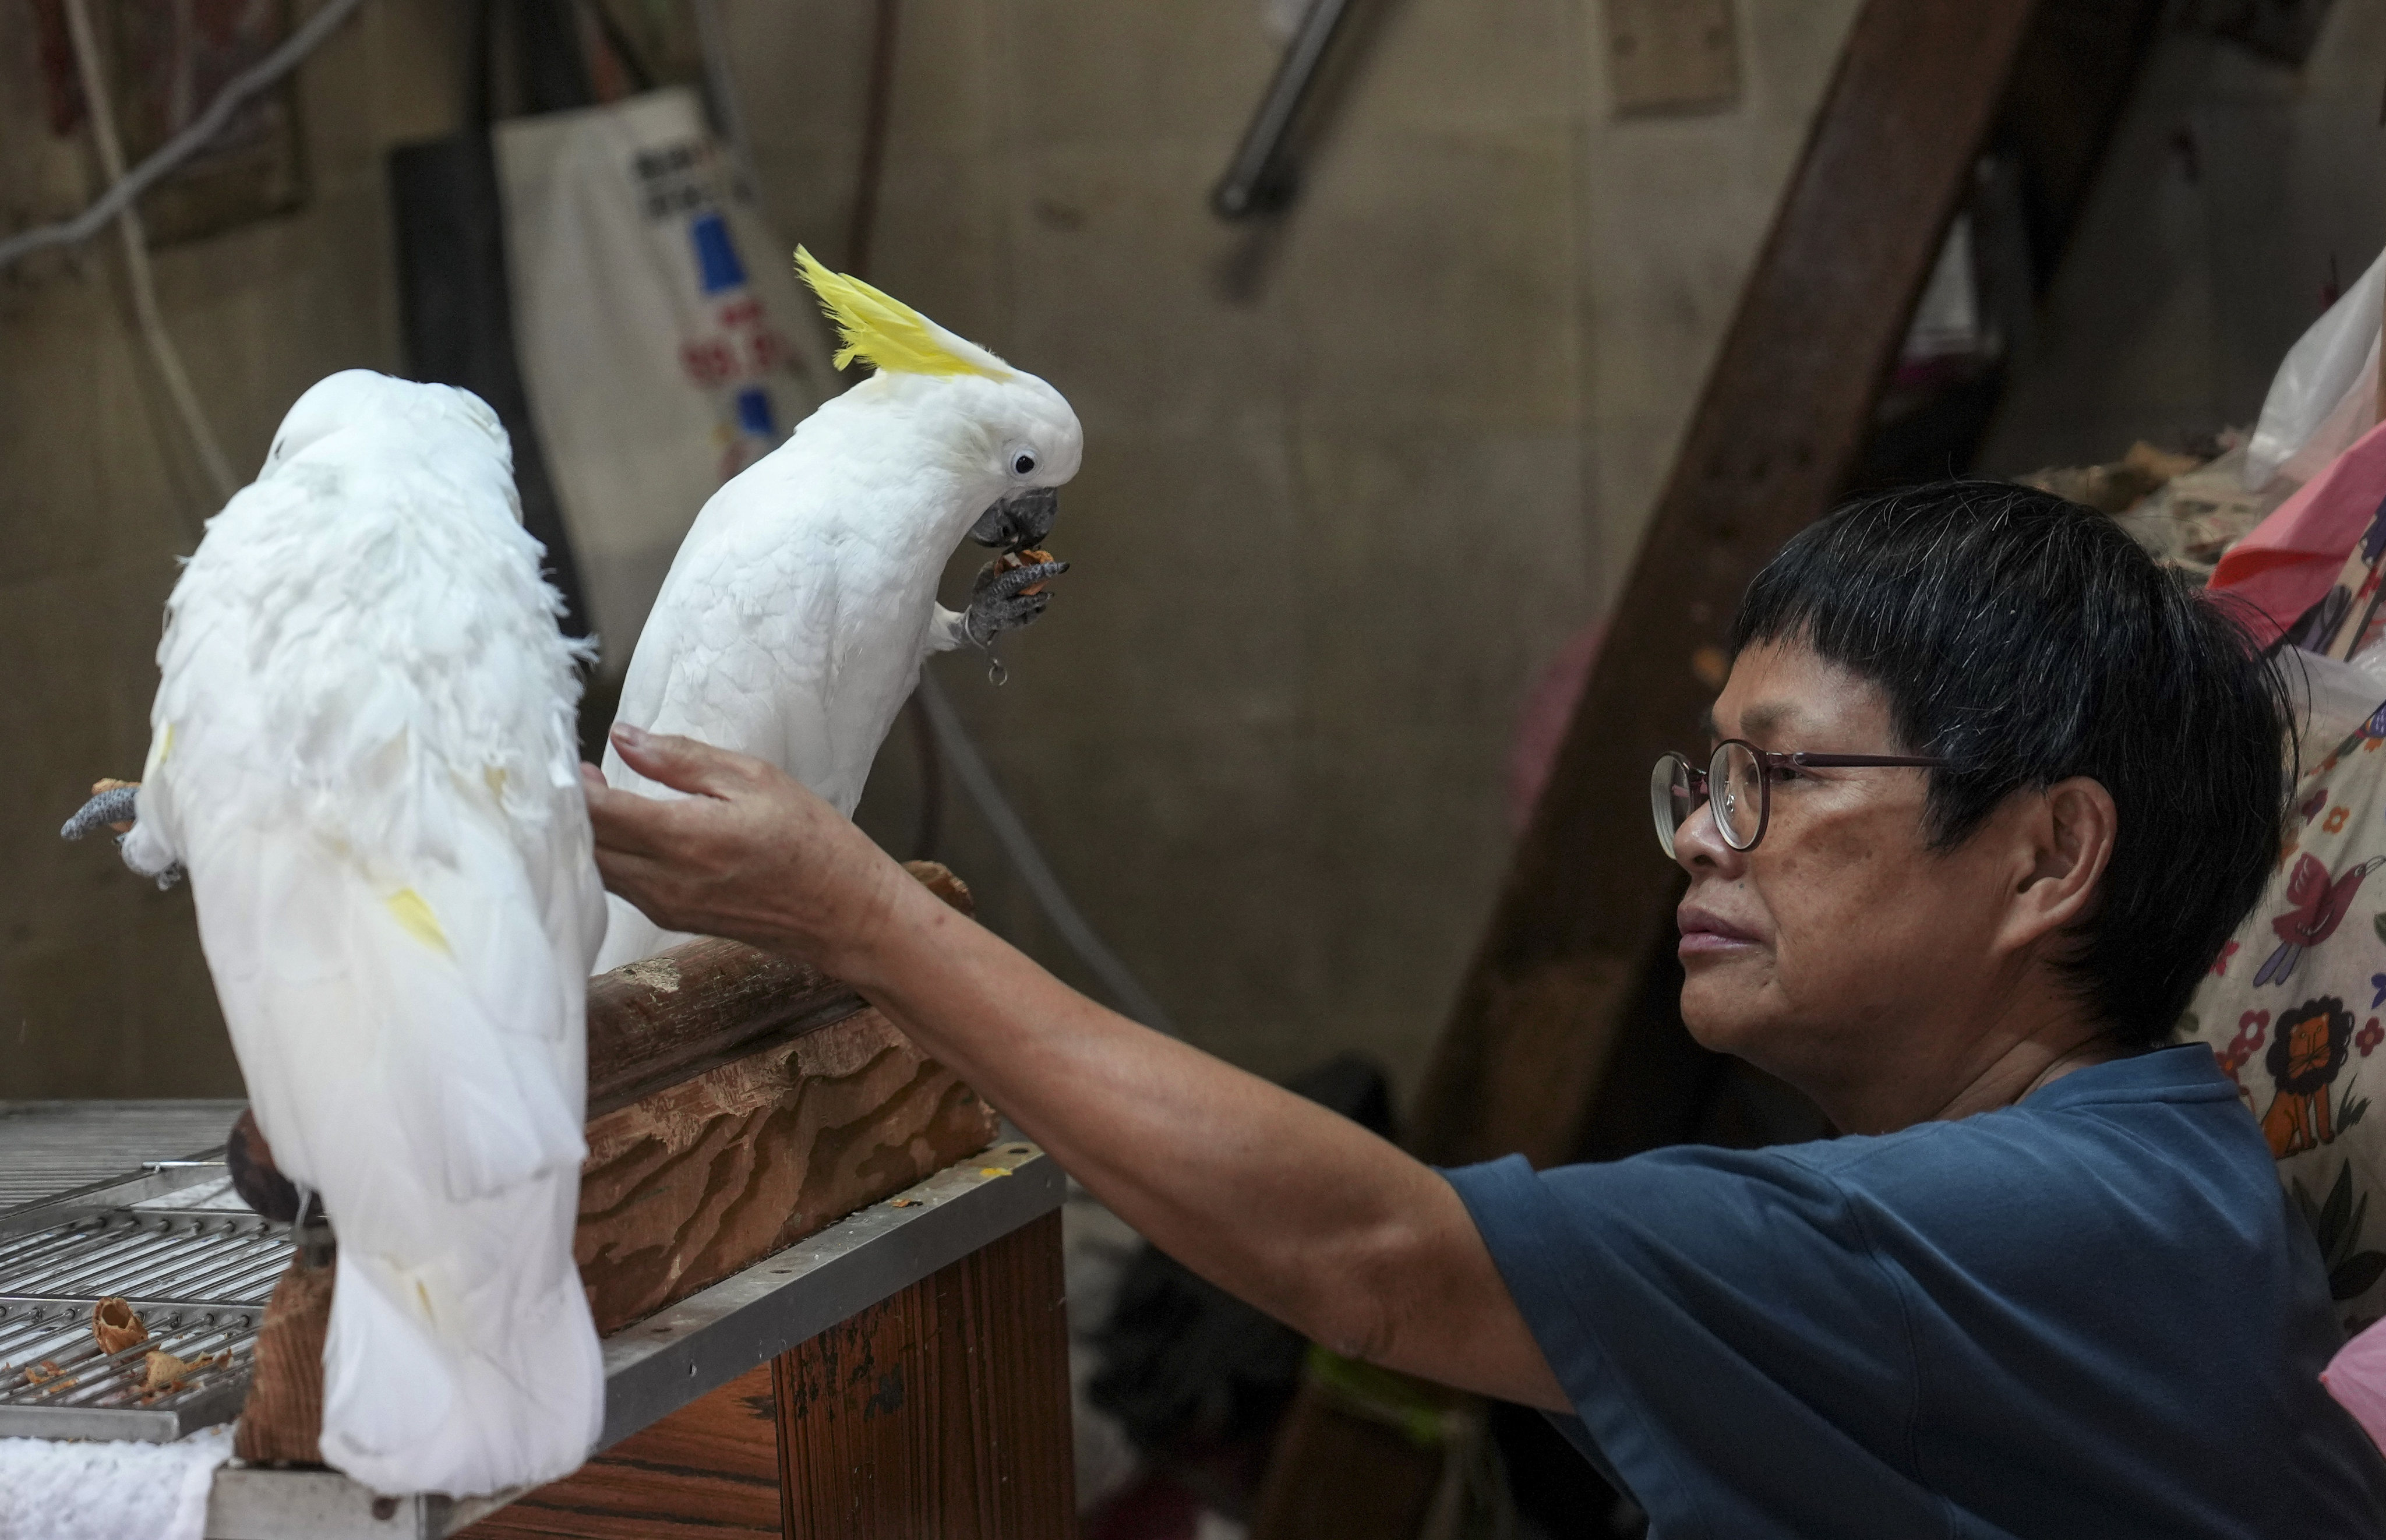 Yellow-crested cockatoos are offered for sale at a Hong Kong market. Photo: Elson LI